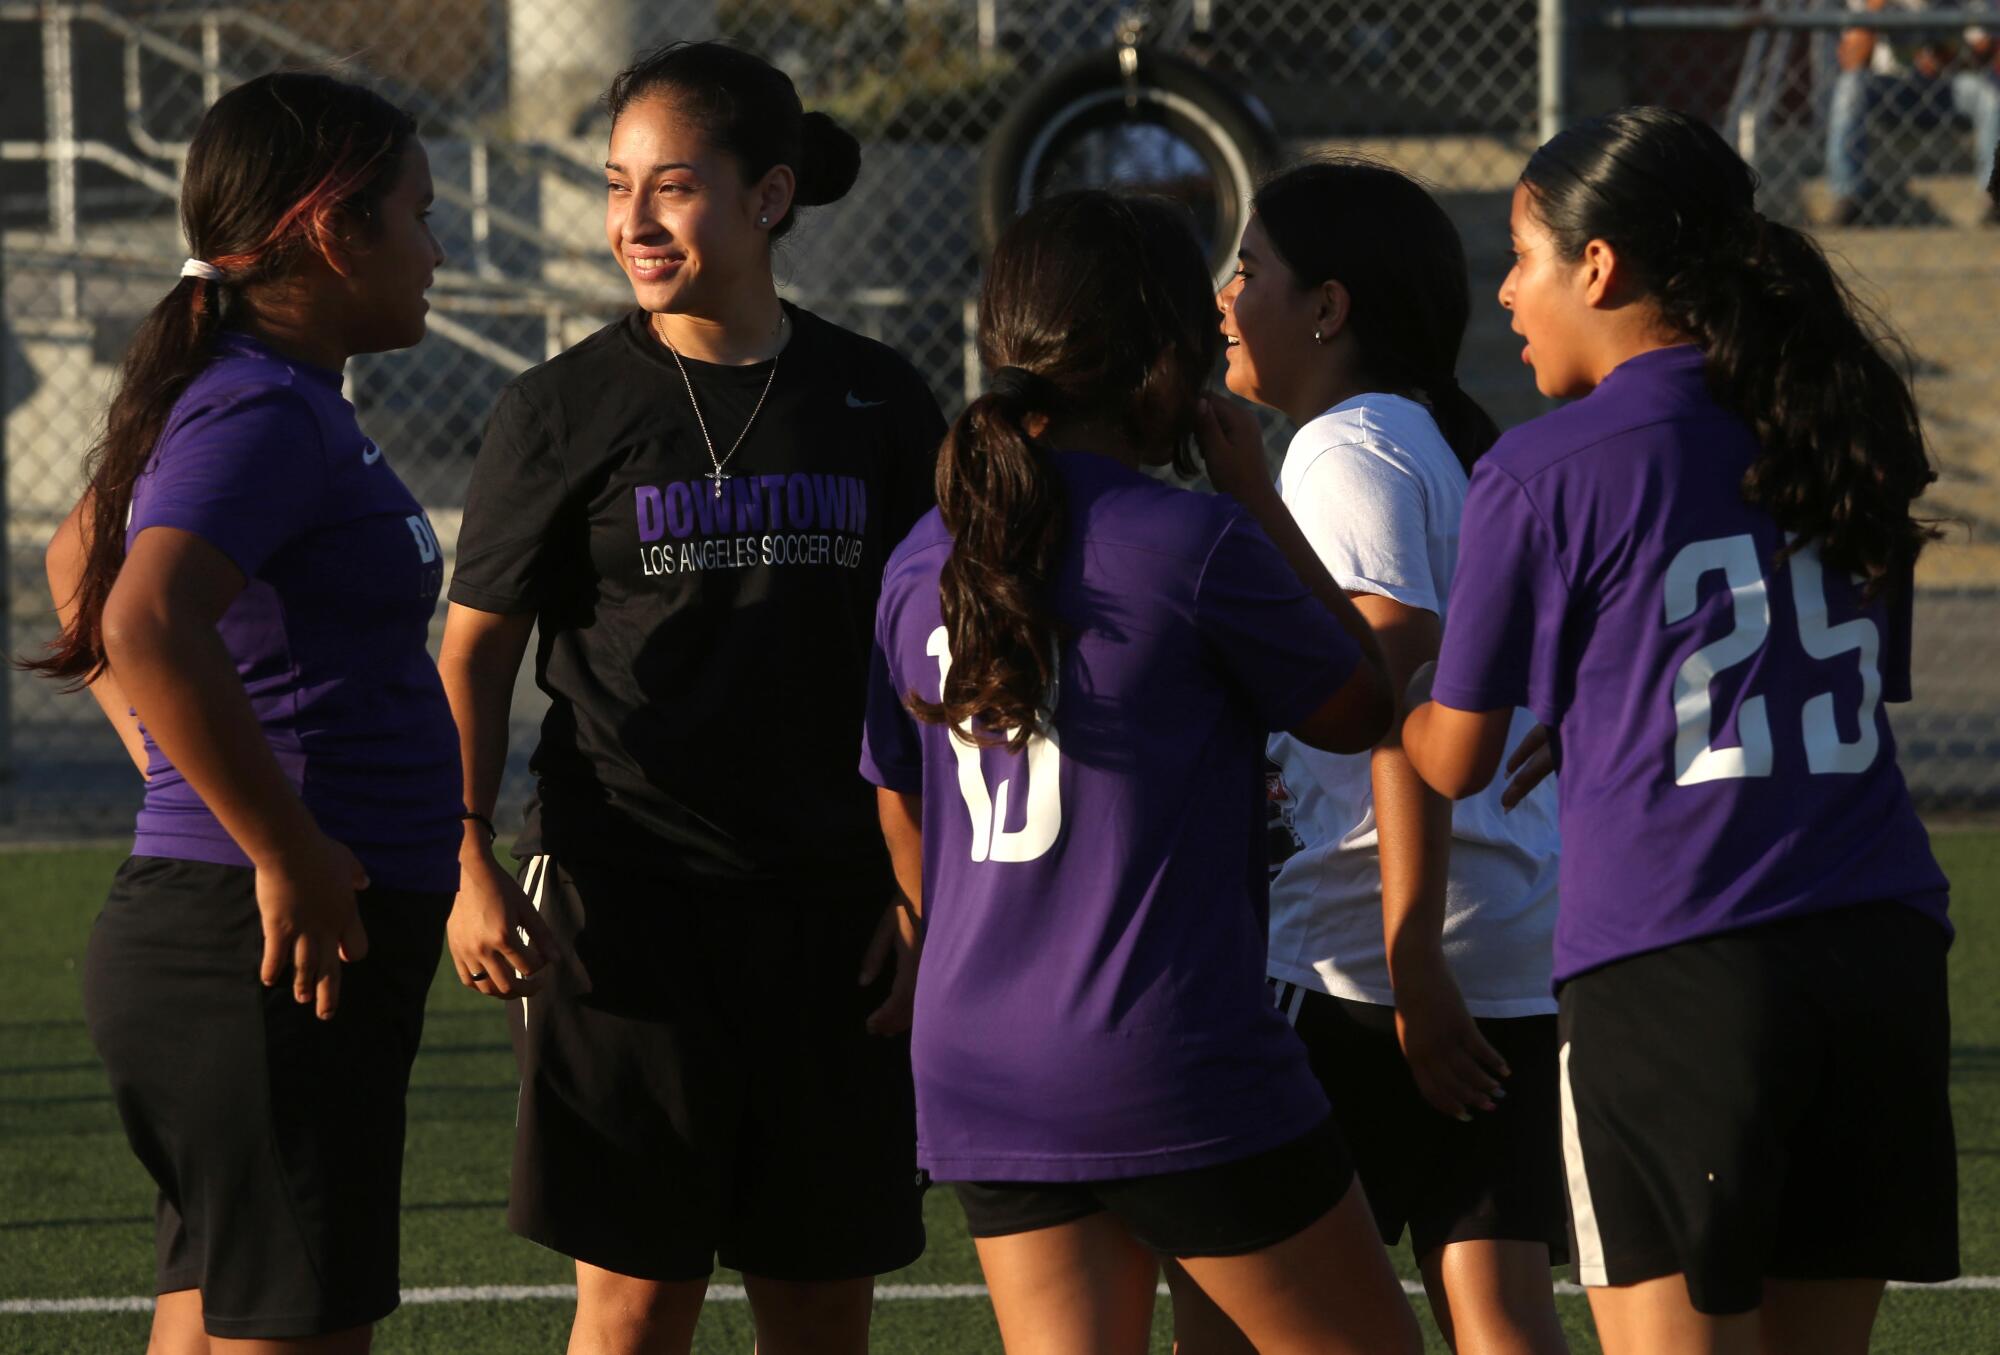 Nayelli Barahona smiles as she coaches players in the Downtown L.A. Soccer Club 